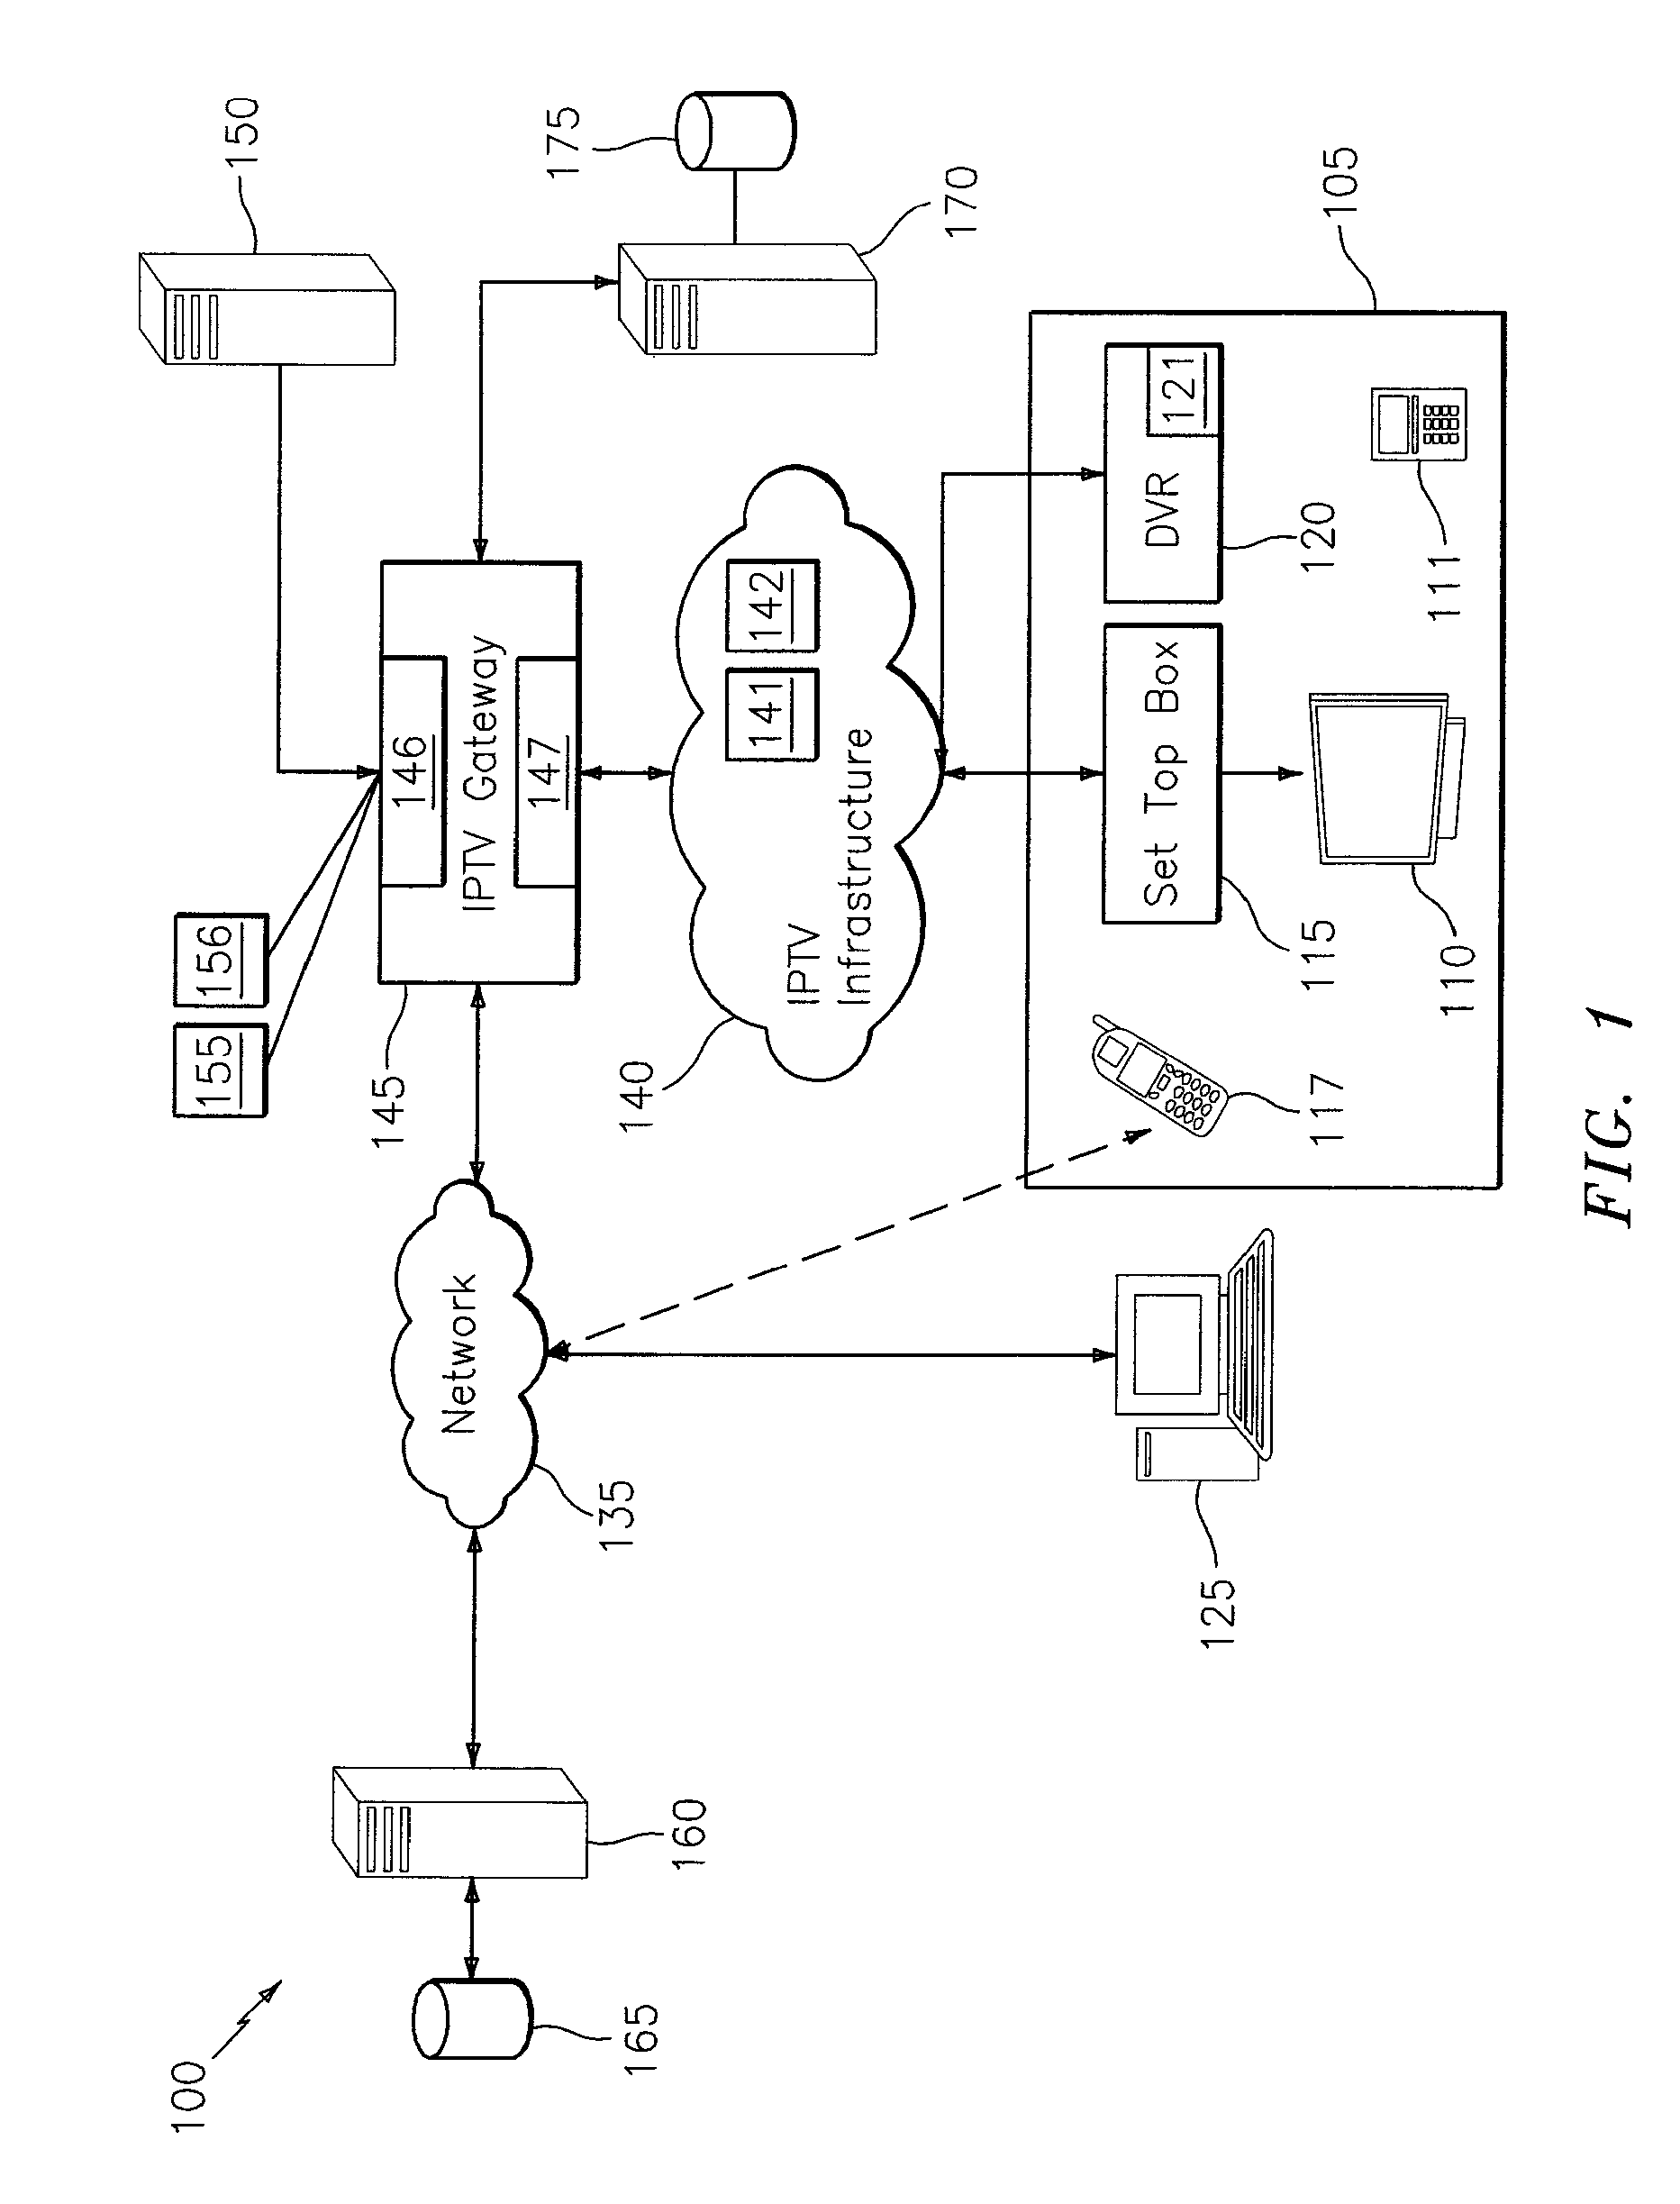 Systems, methods, and computer products for digital video recorder management and scheduling